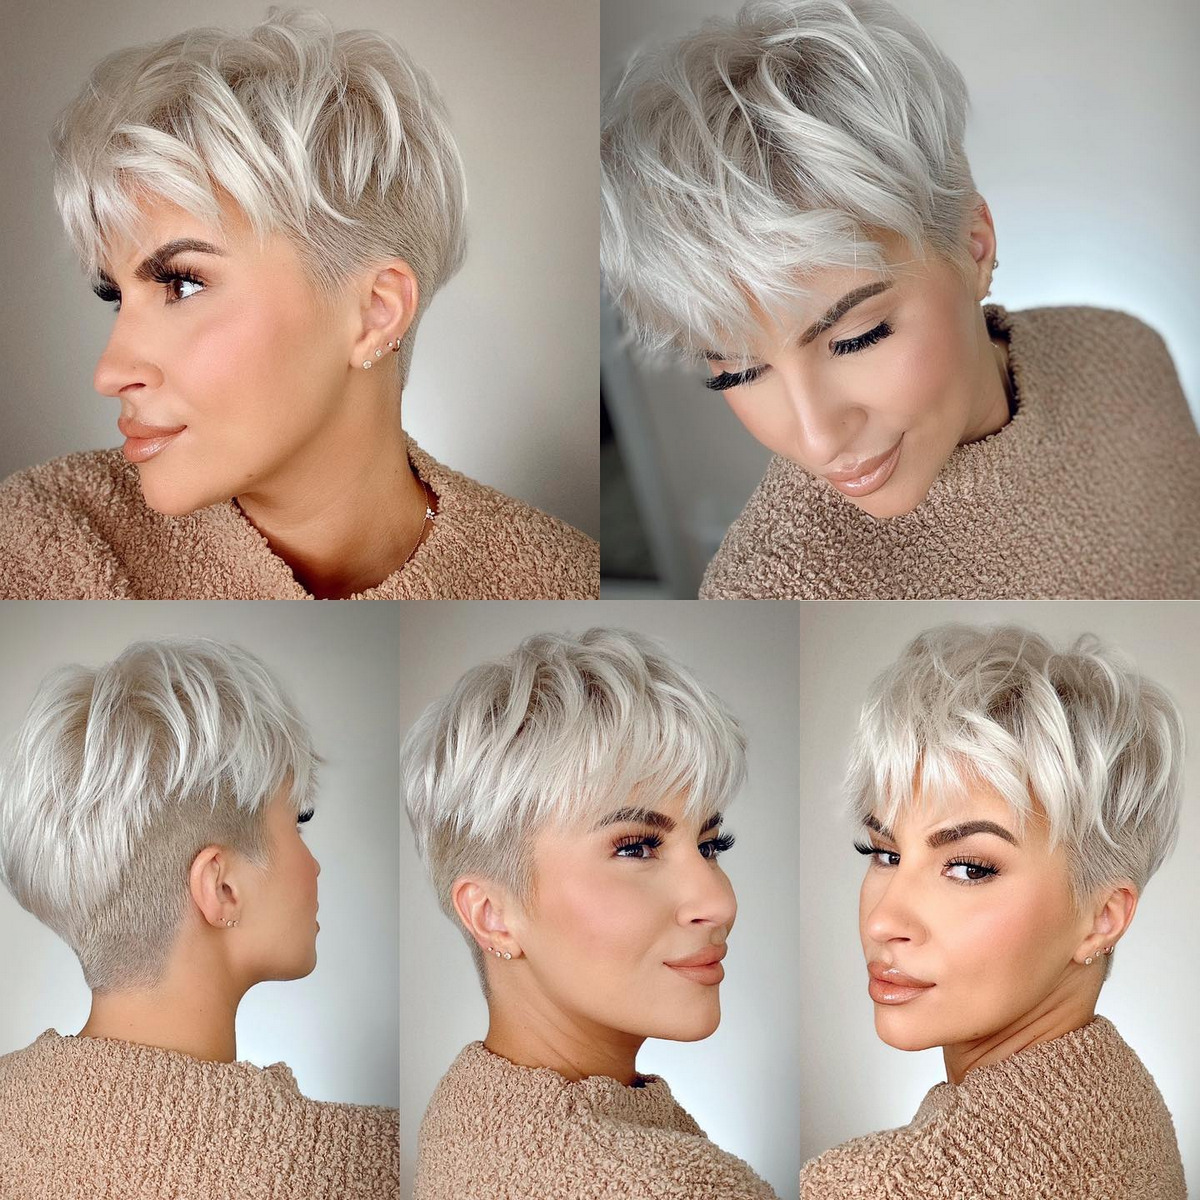 61 Pixie Cut Hairstyles for 2021: Best Short Pixie Haircuts | Glamour